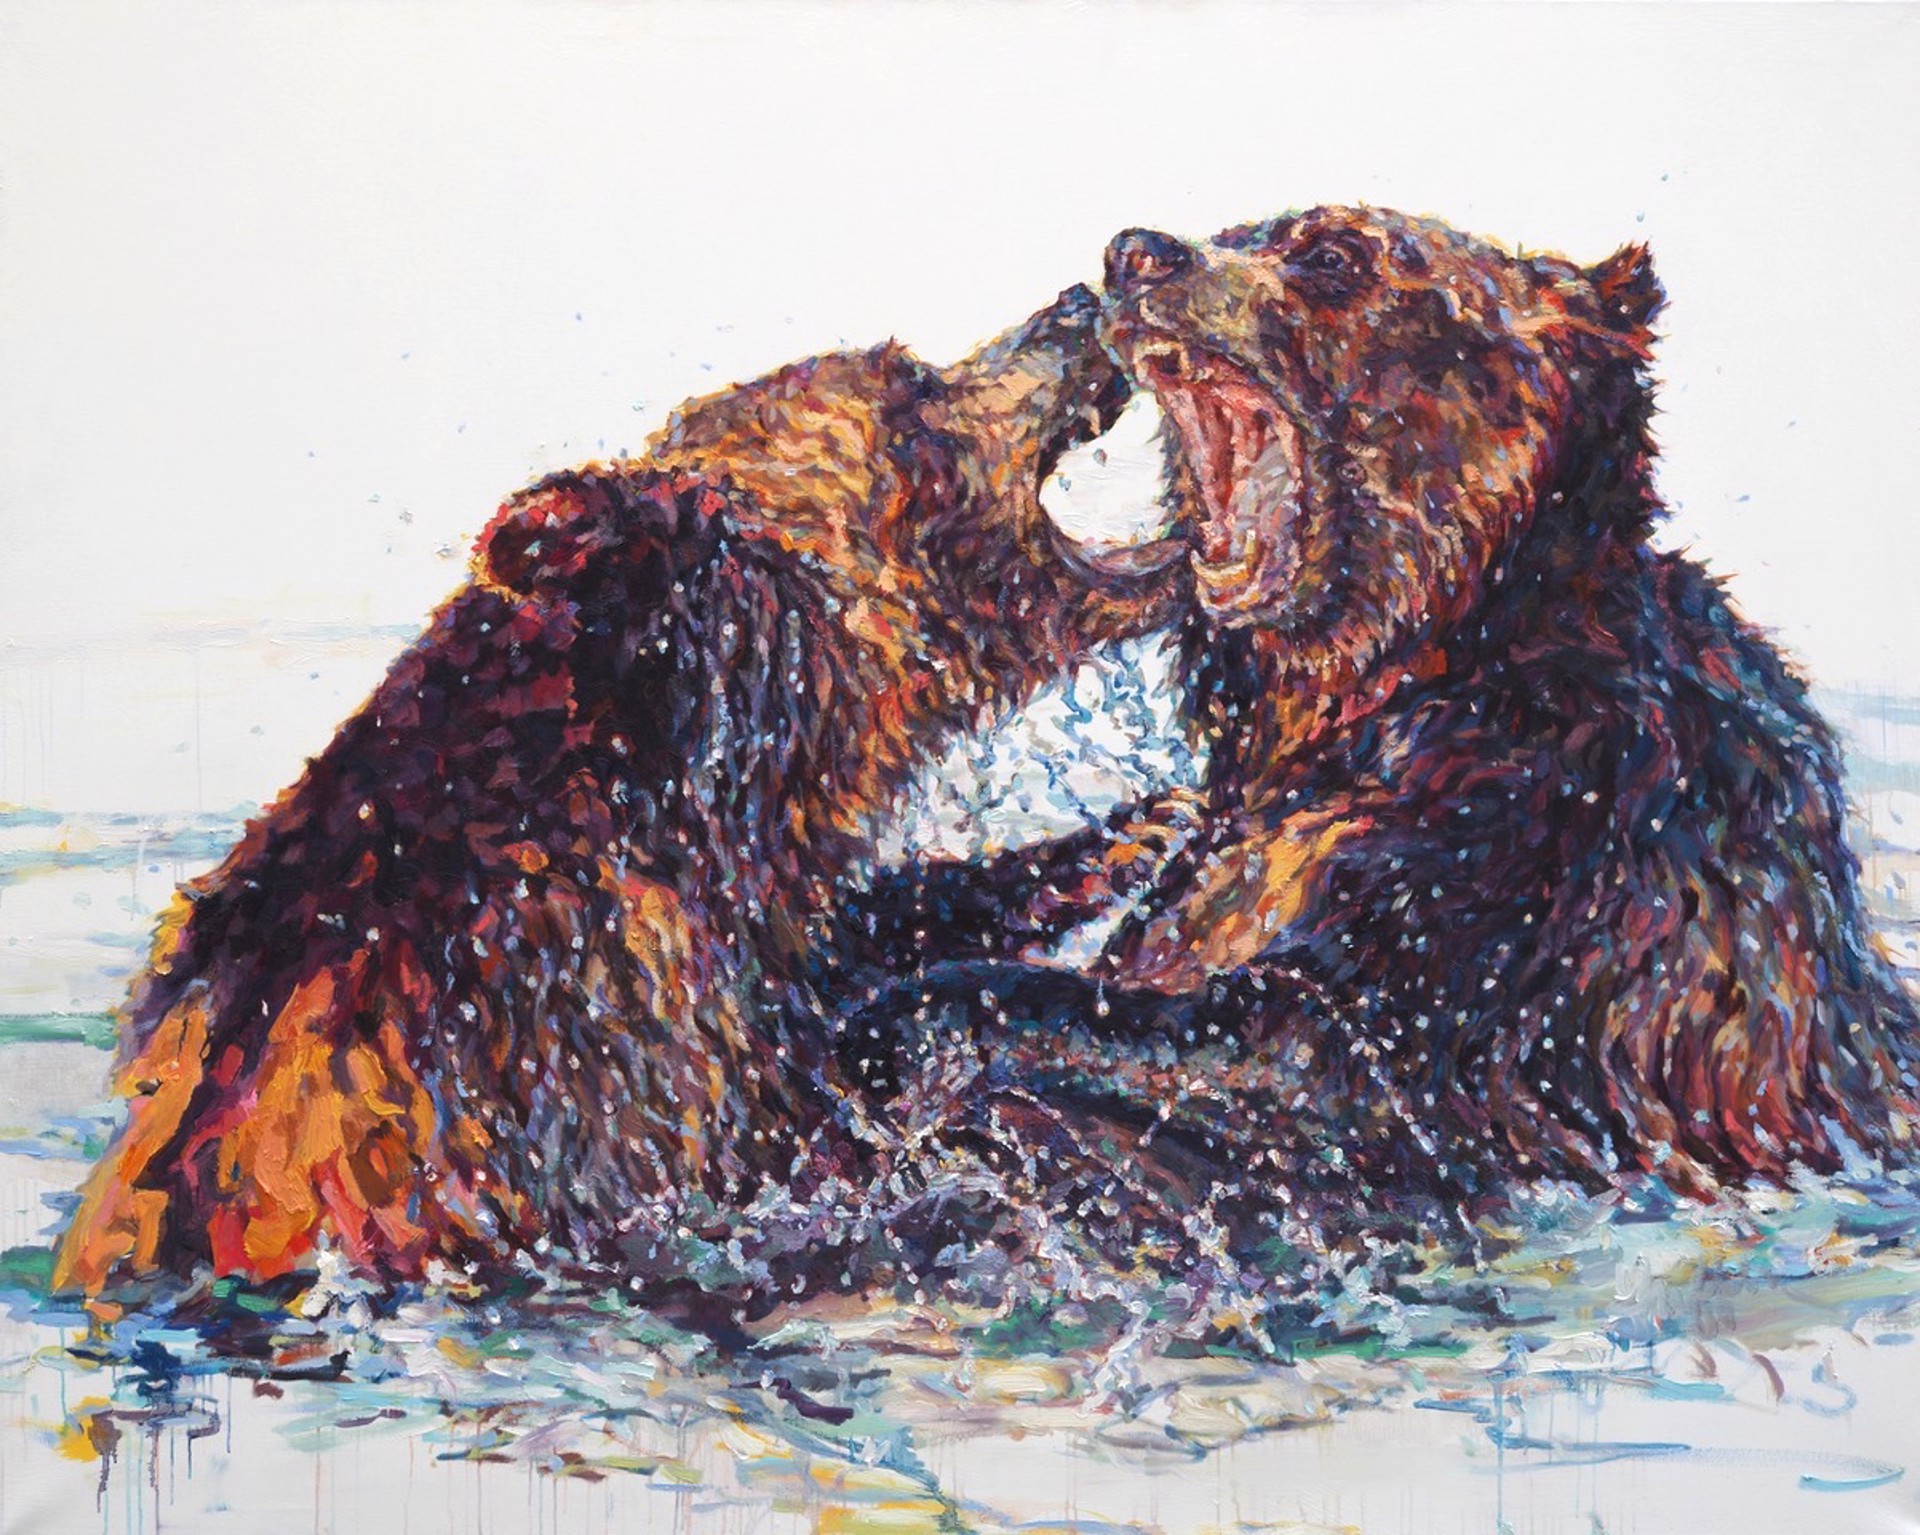 Patricia Griffin Grizzly Bears In Oil On Linen, A Contemporary Fine Art Painting and Modern Wildlife Art Piece Available At Gallery Wild